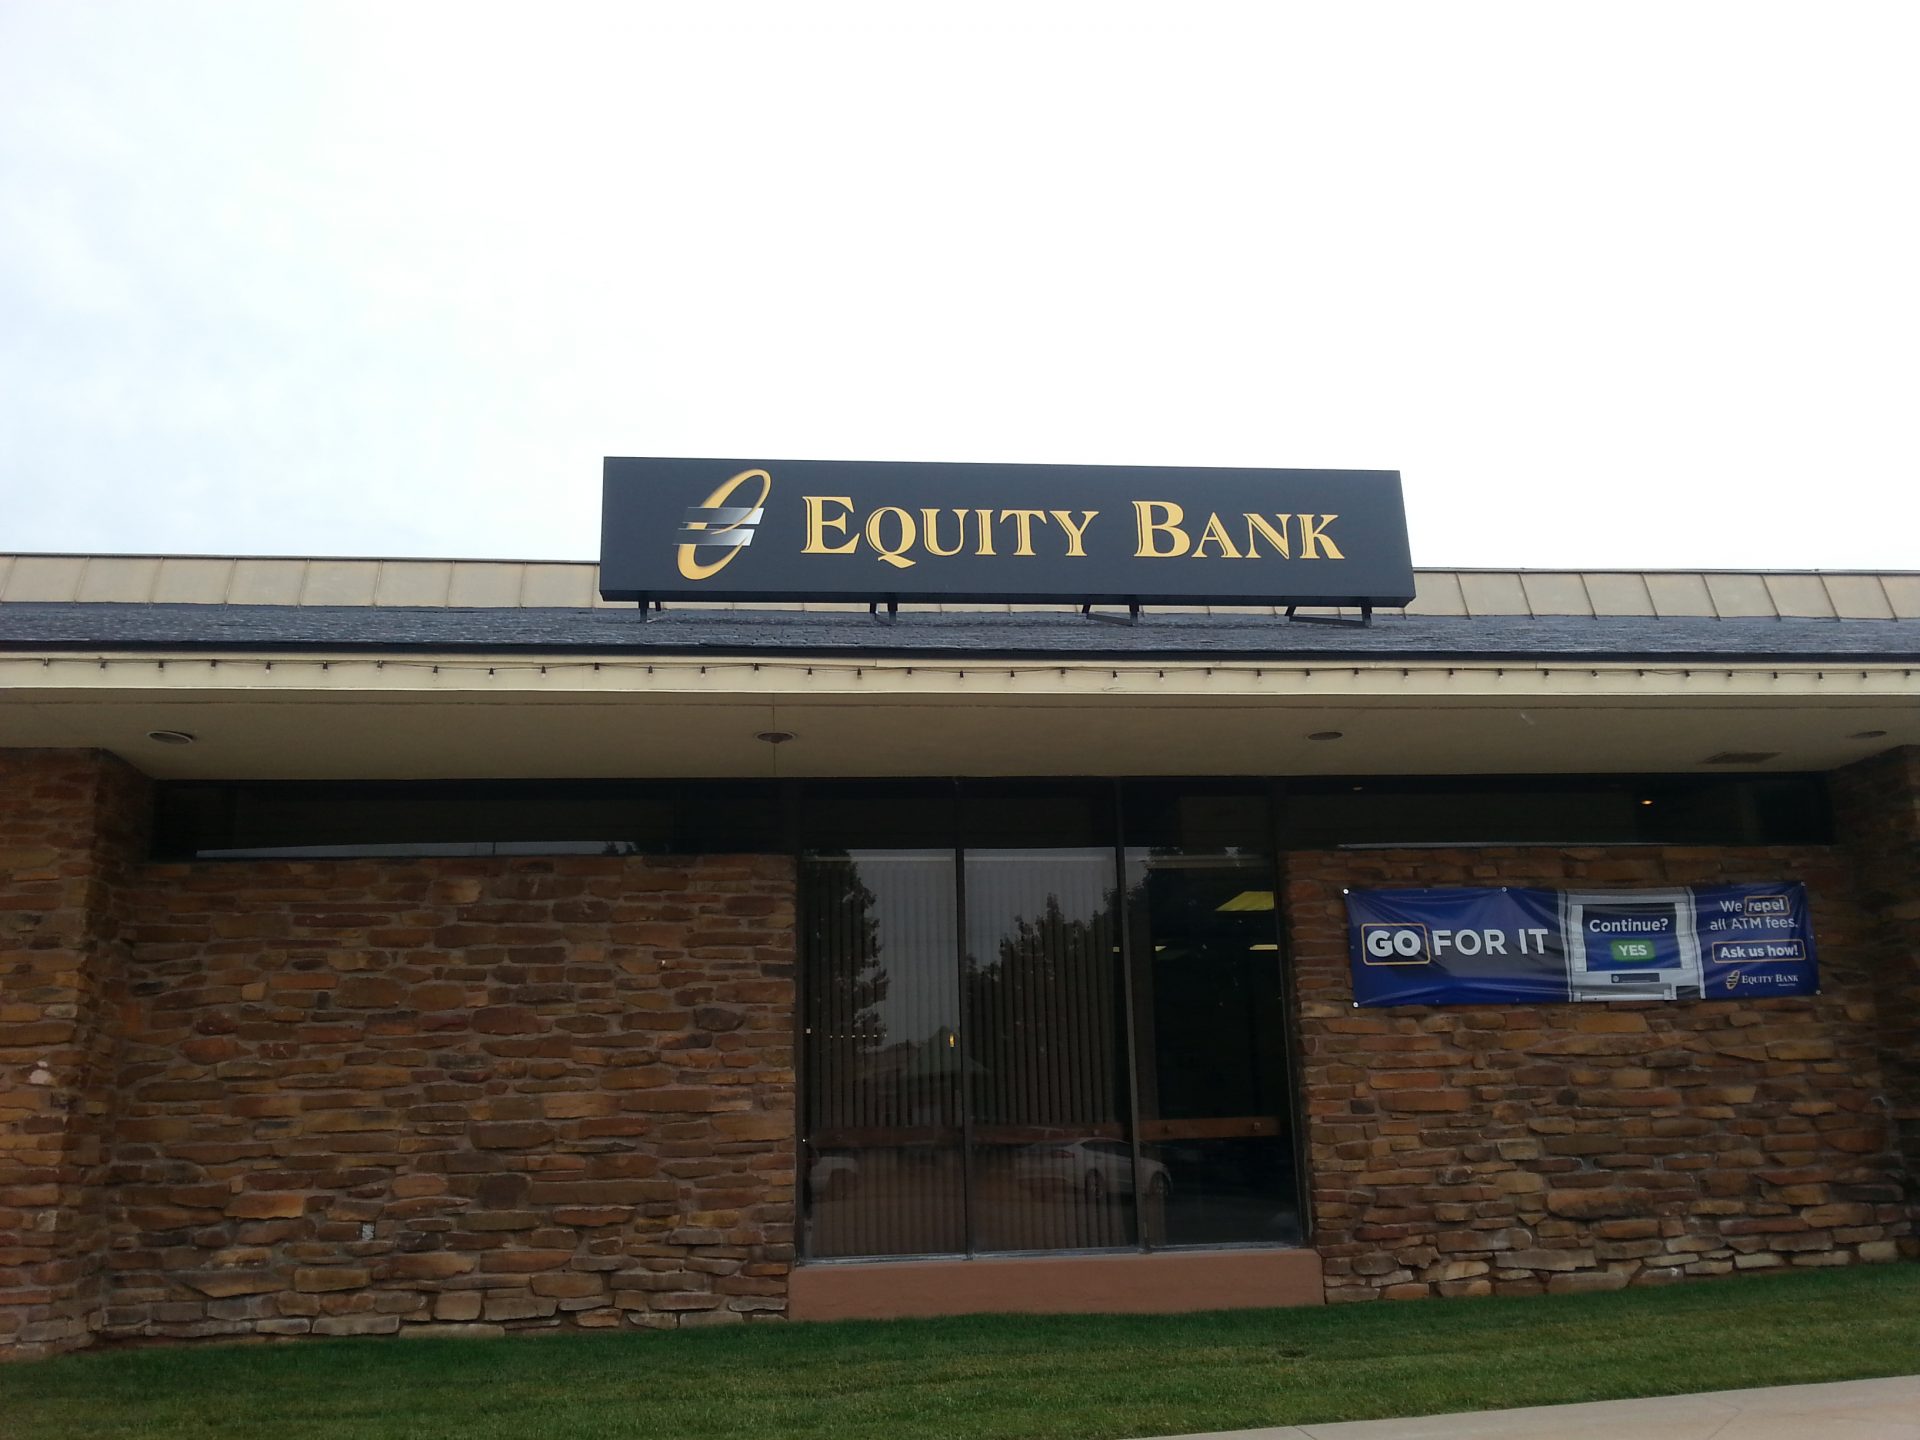 Equity Bank Independence branch exterior.